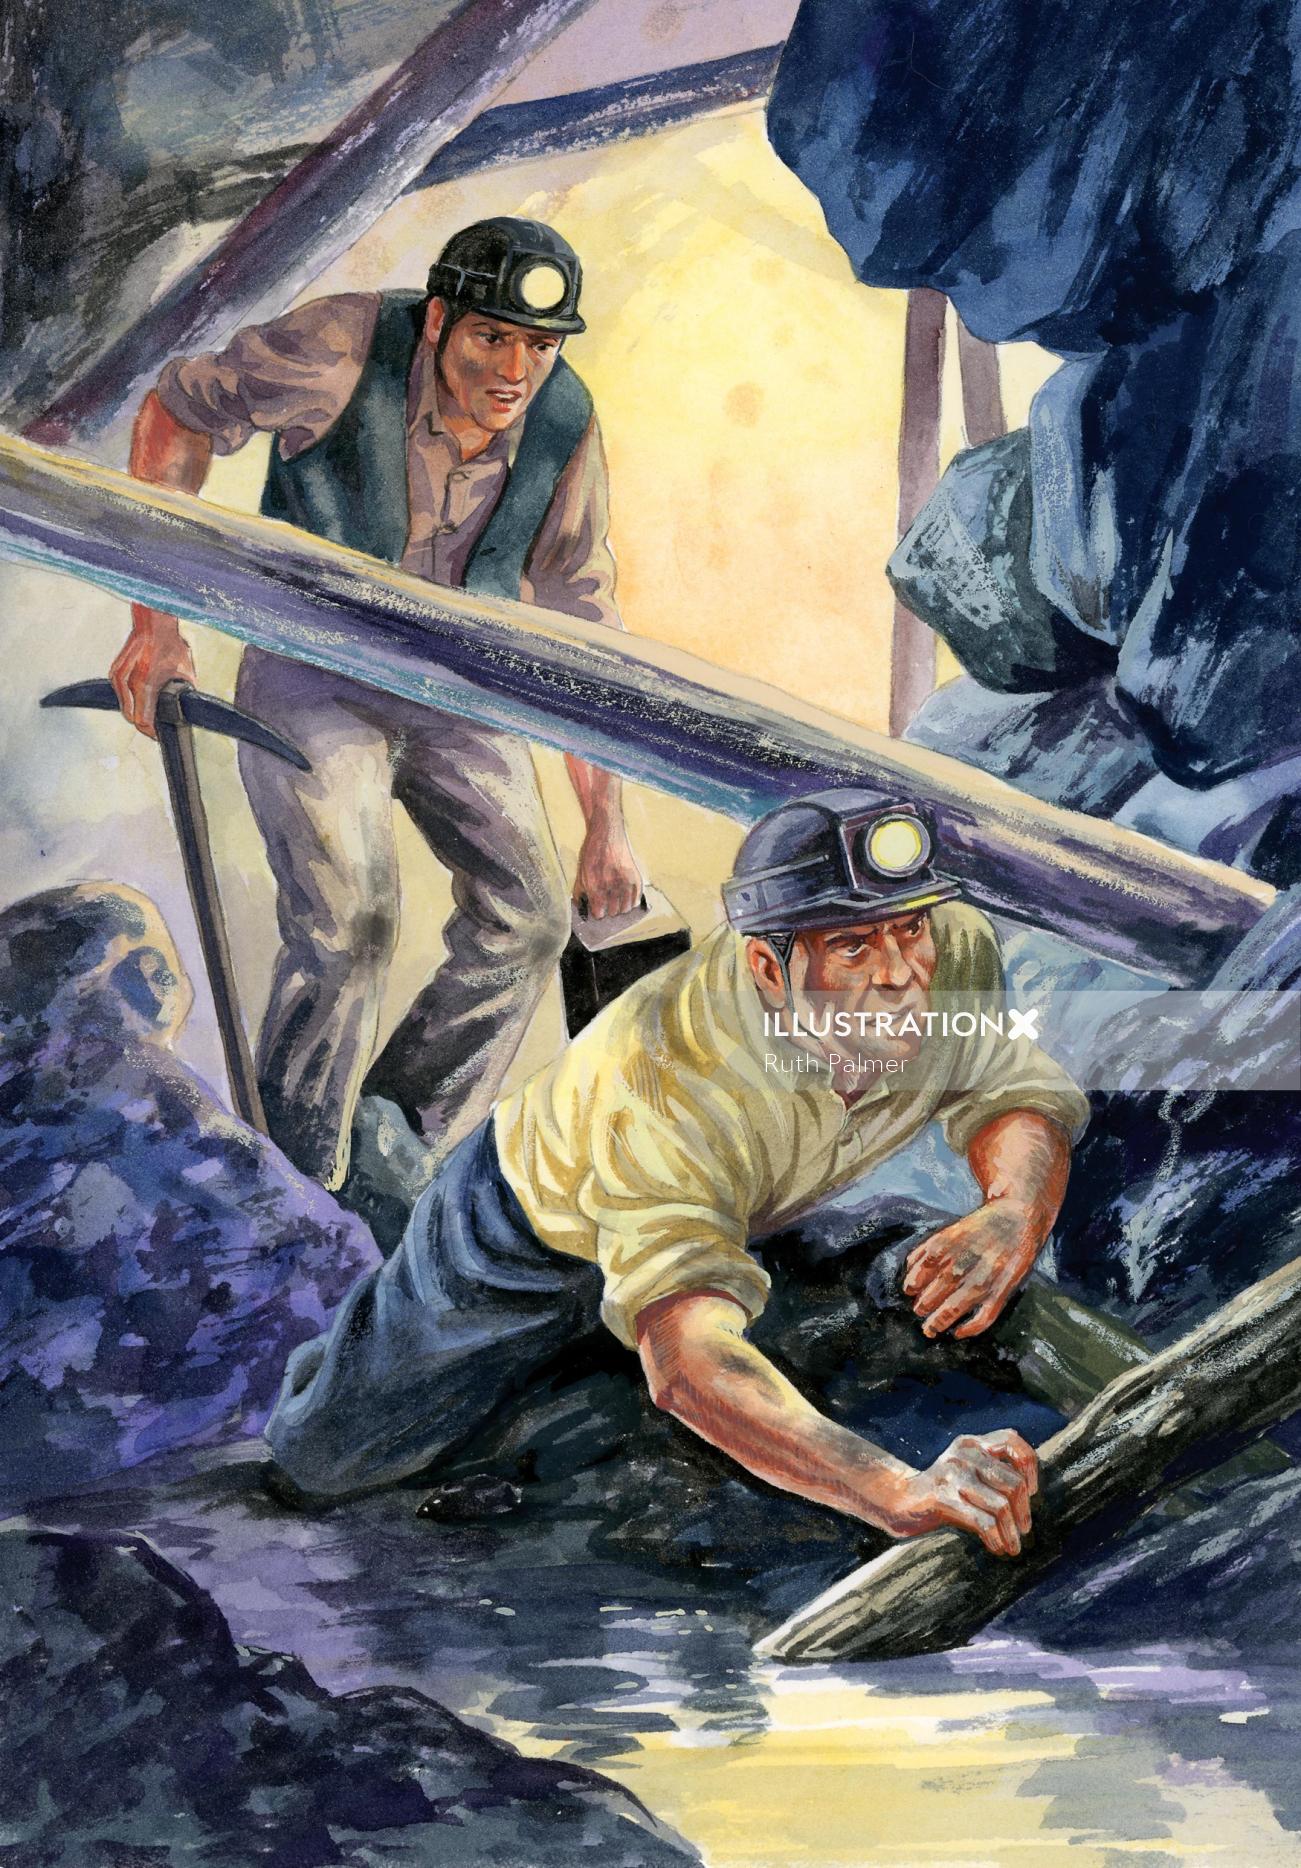 Employment by coal miners depicted in paintings